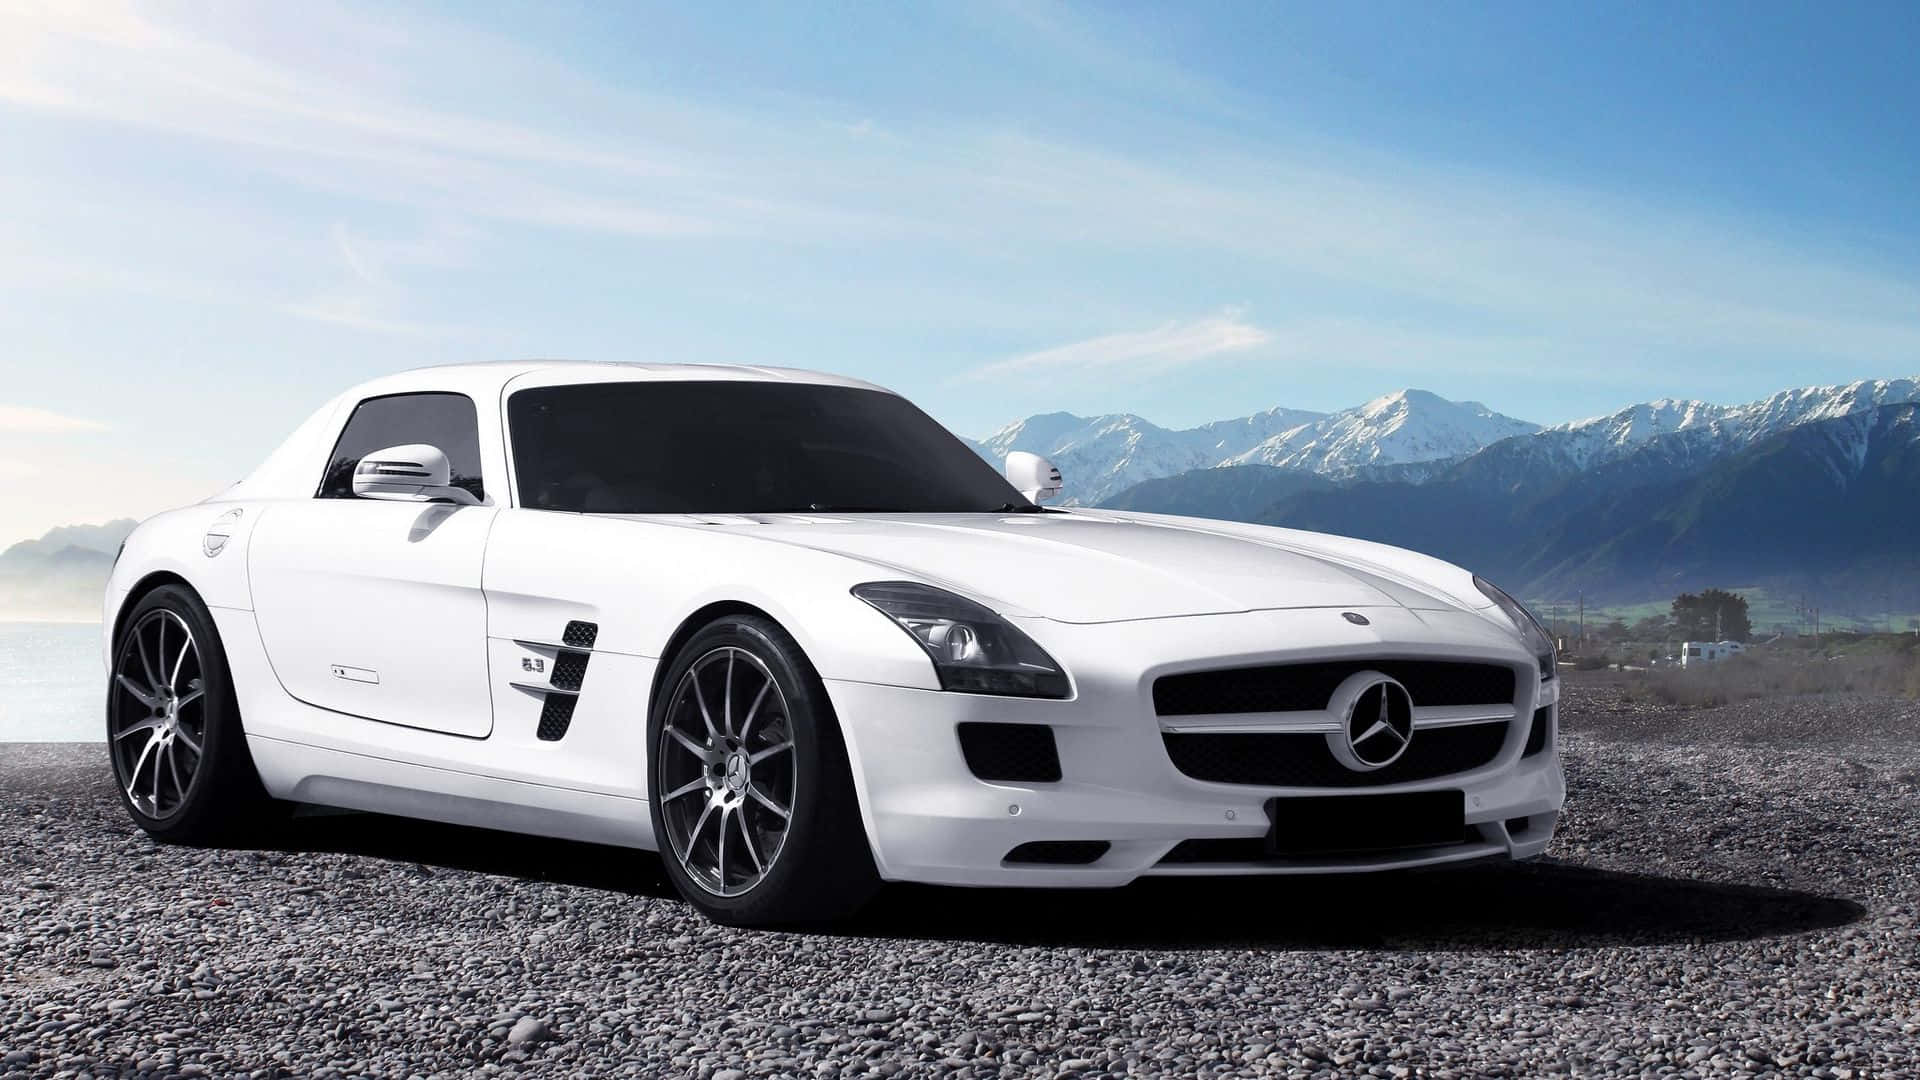 Take your ride to the next level with a sleek Mercedes Benz Wallpaper